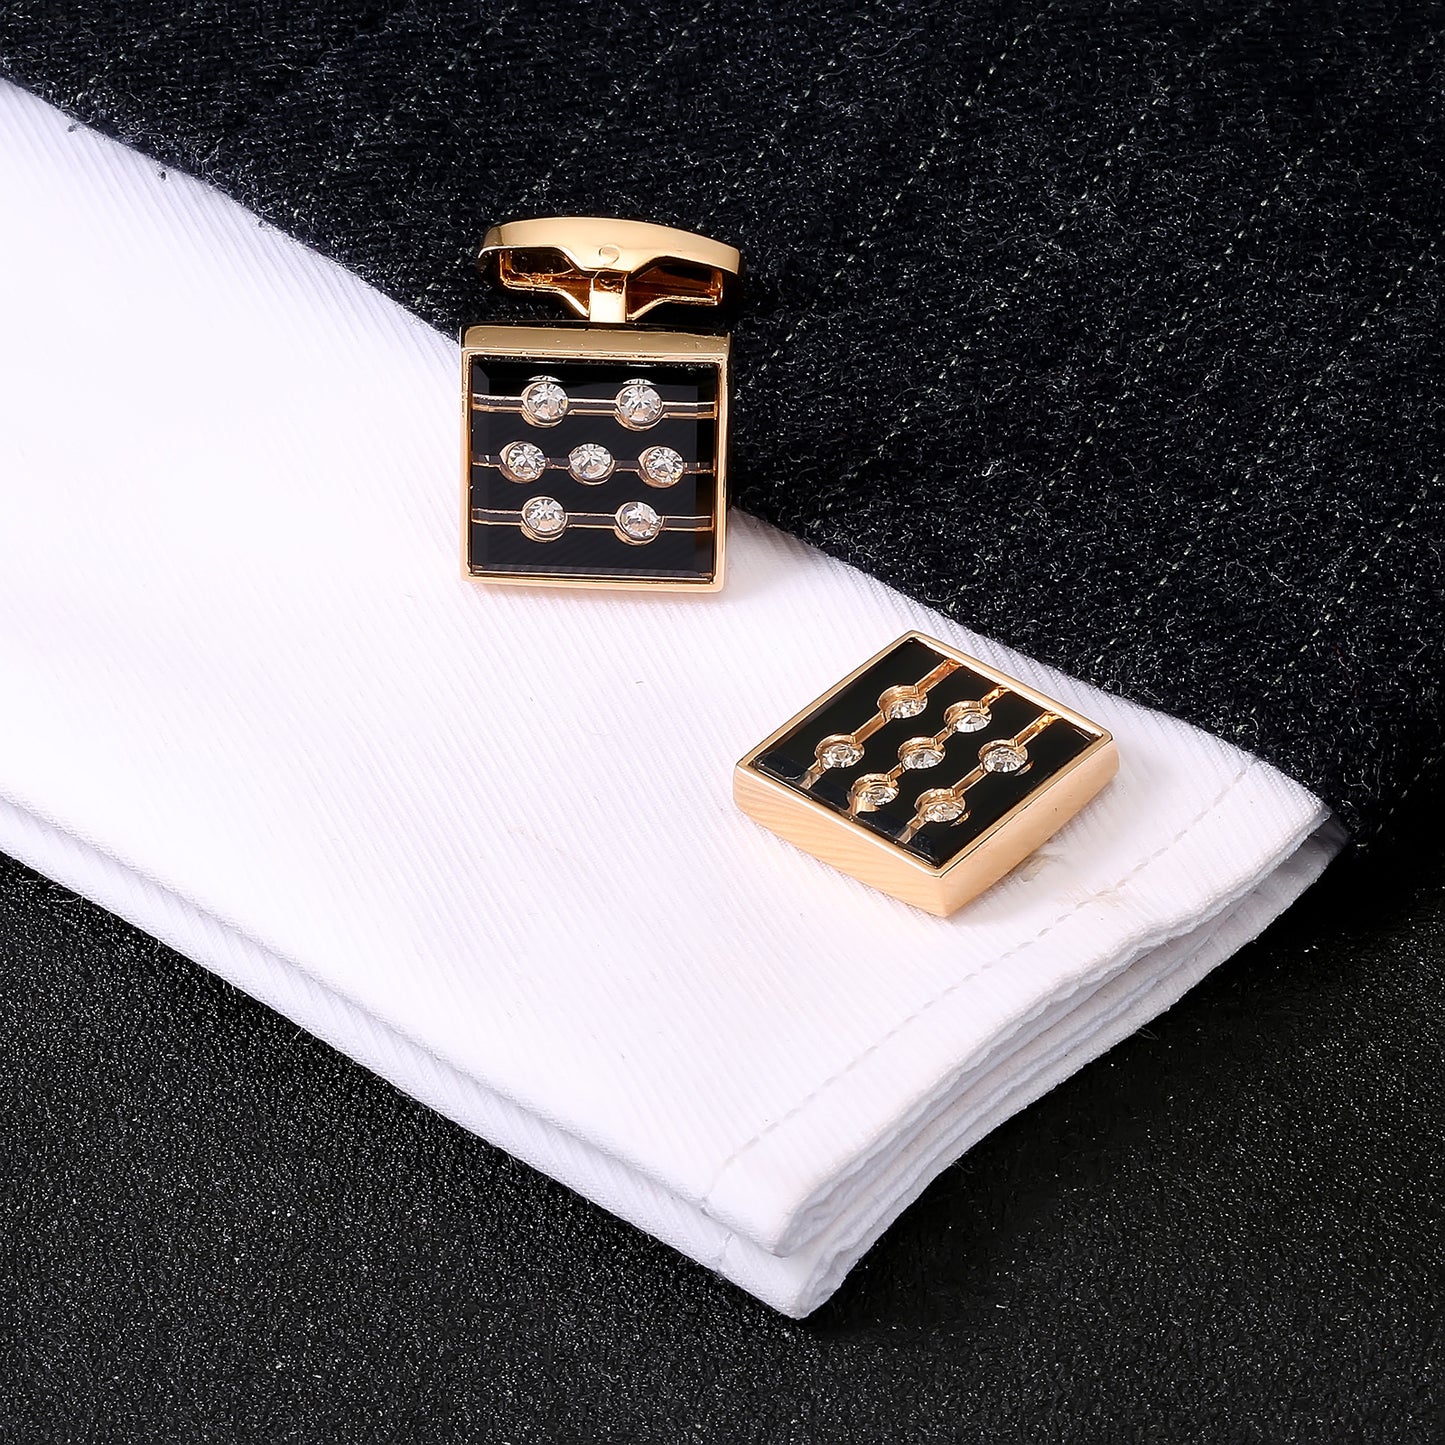 High-Quality Diamond-Studded Rose Gold Simple And Fashionable French Cufflinks